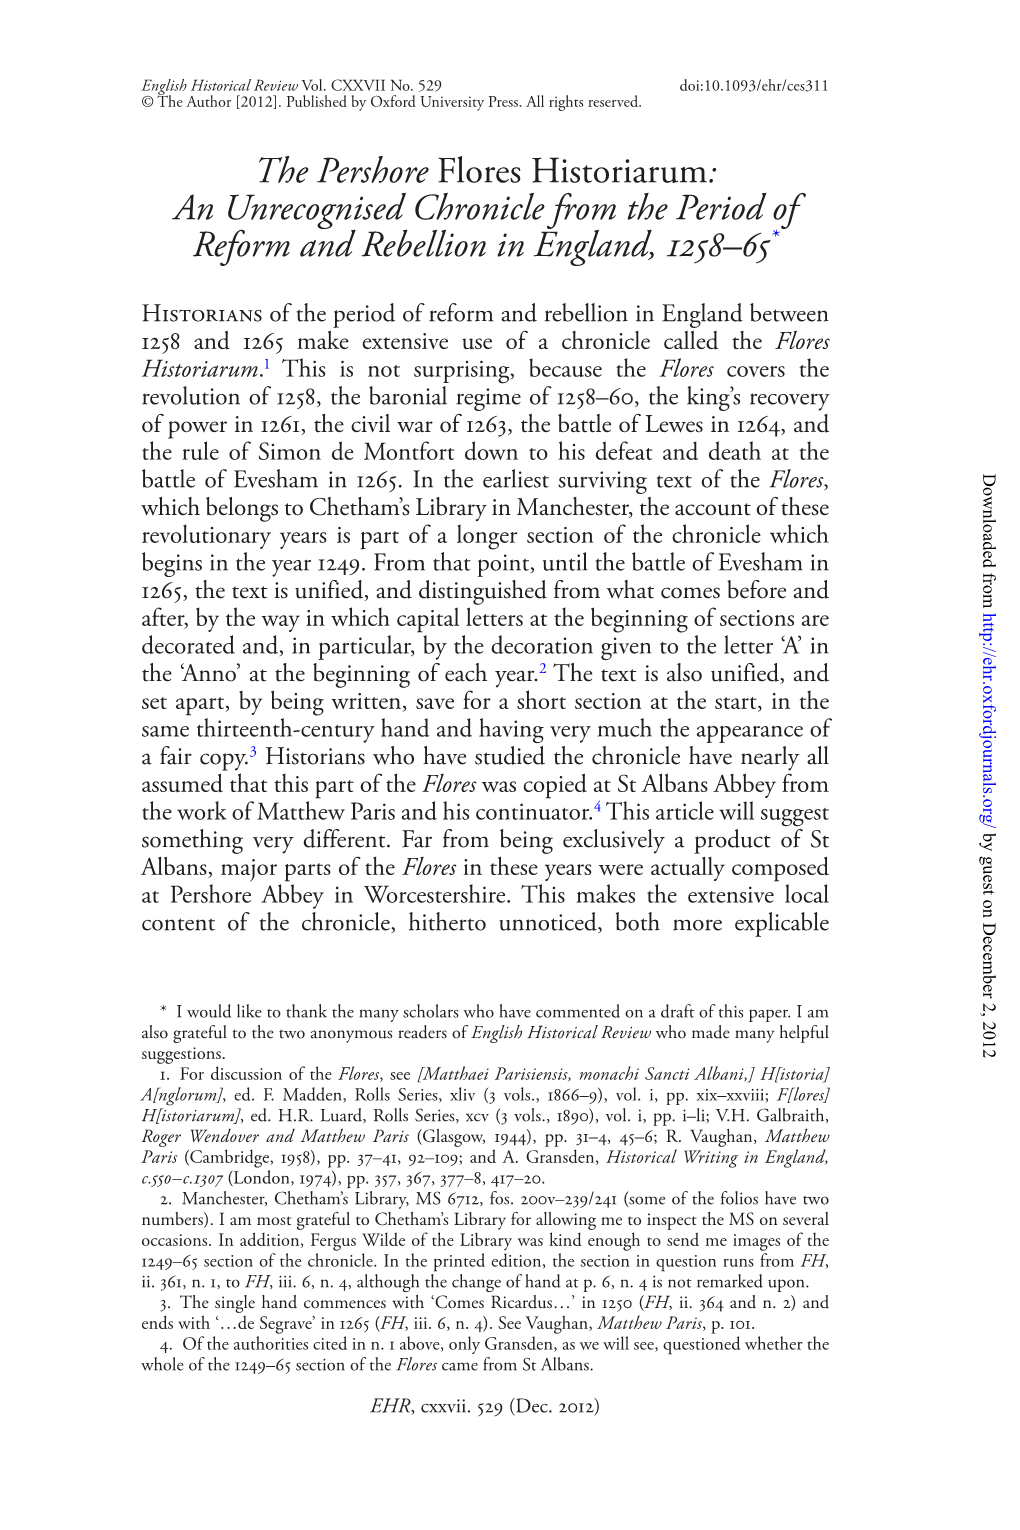 The Pershore Flores Historiarum: an Unrecognised Chronicle from the Period of Reform and Rebellion in England, 1258–65*